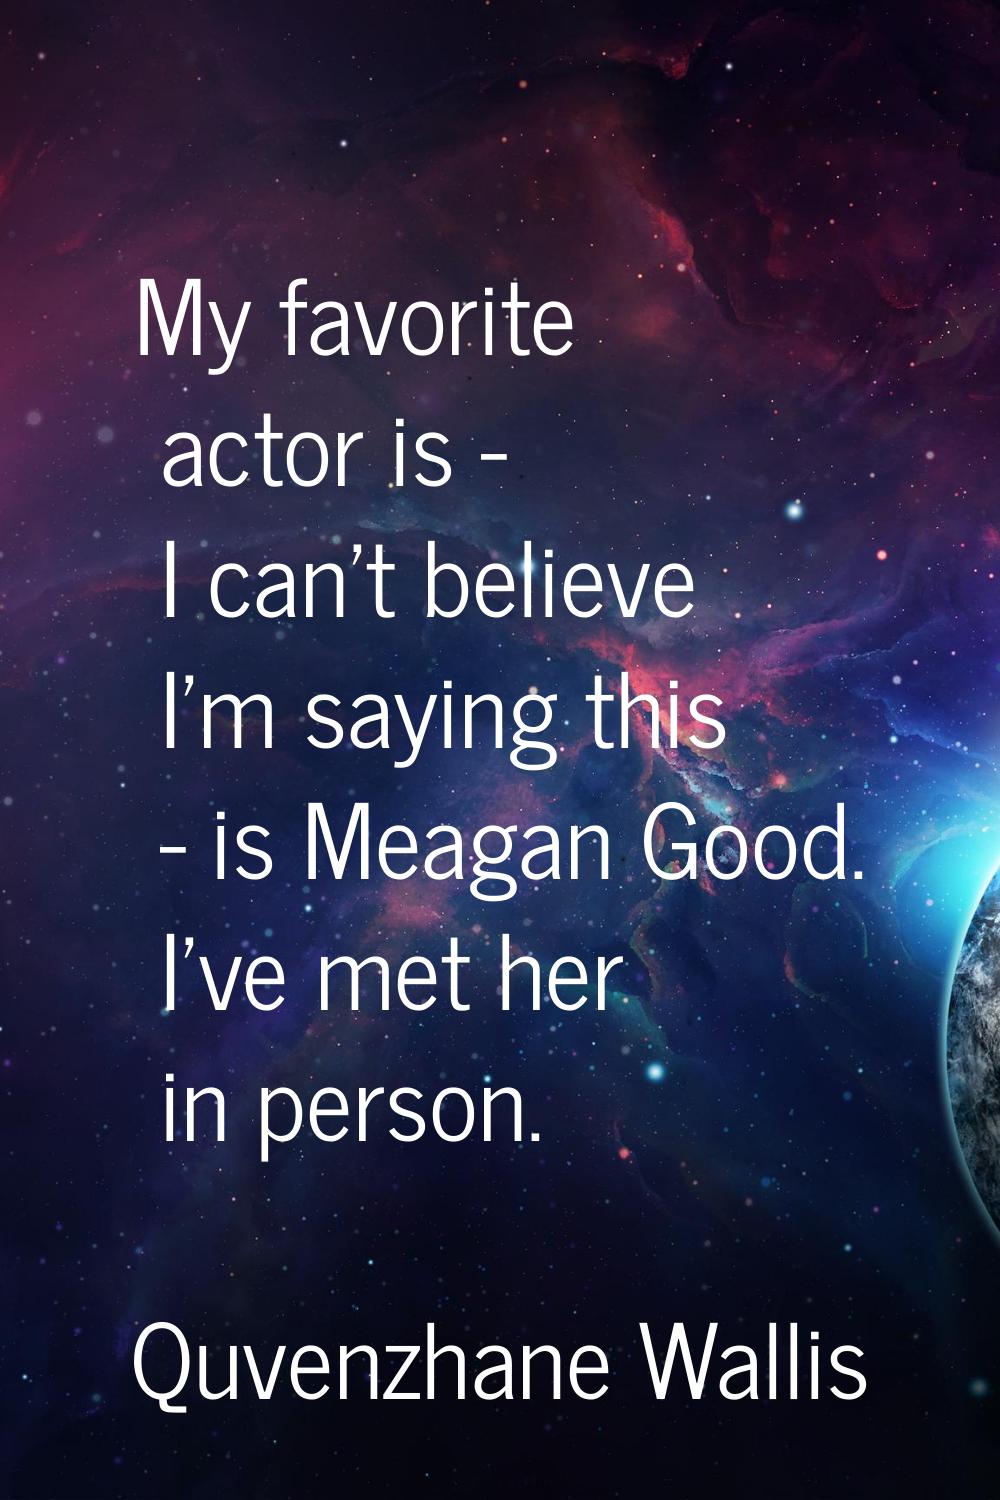 My favorite actor is - I can't believe I'm saying this - is Meagan Good. I've met her in person.